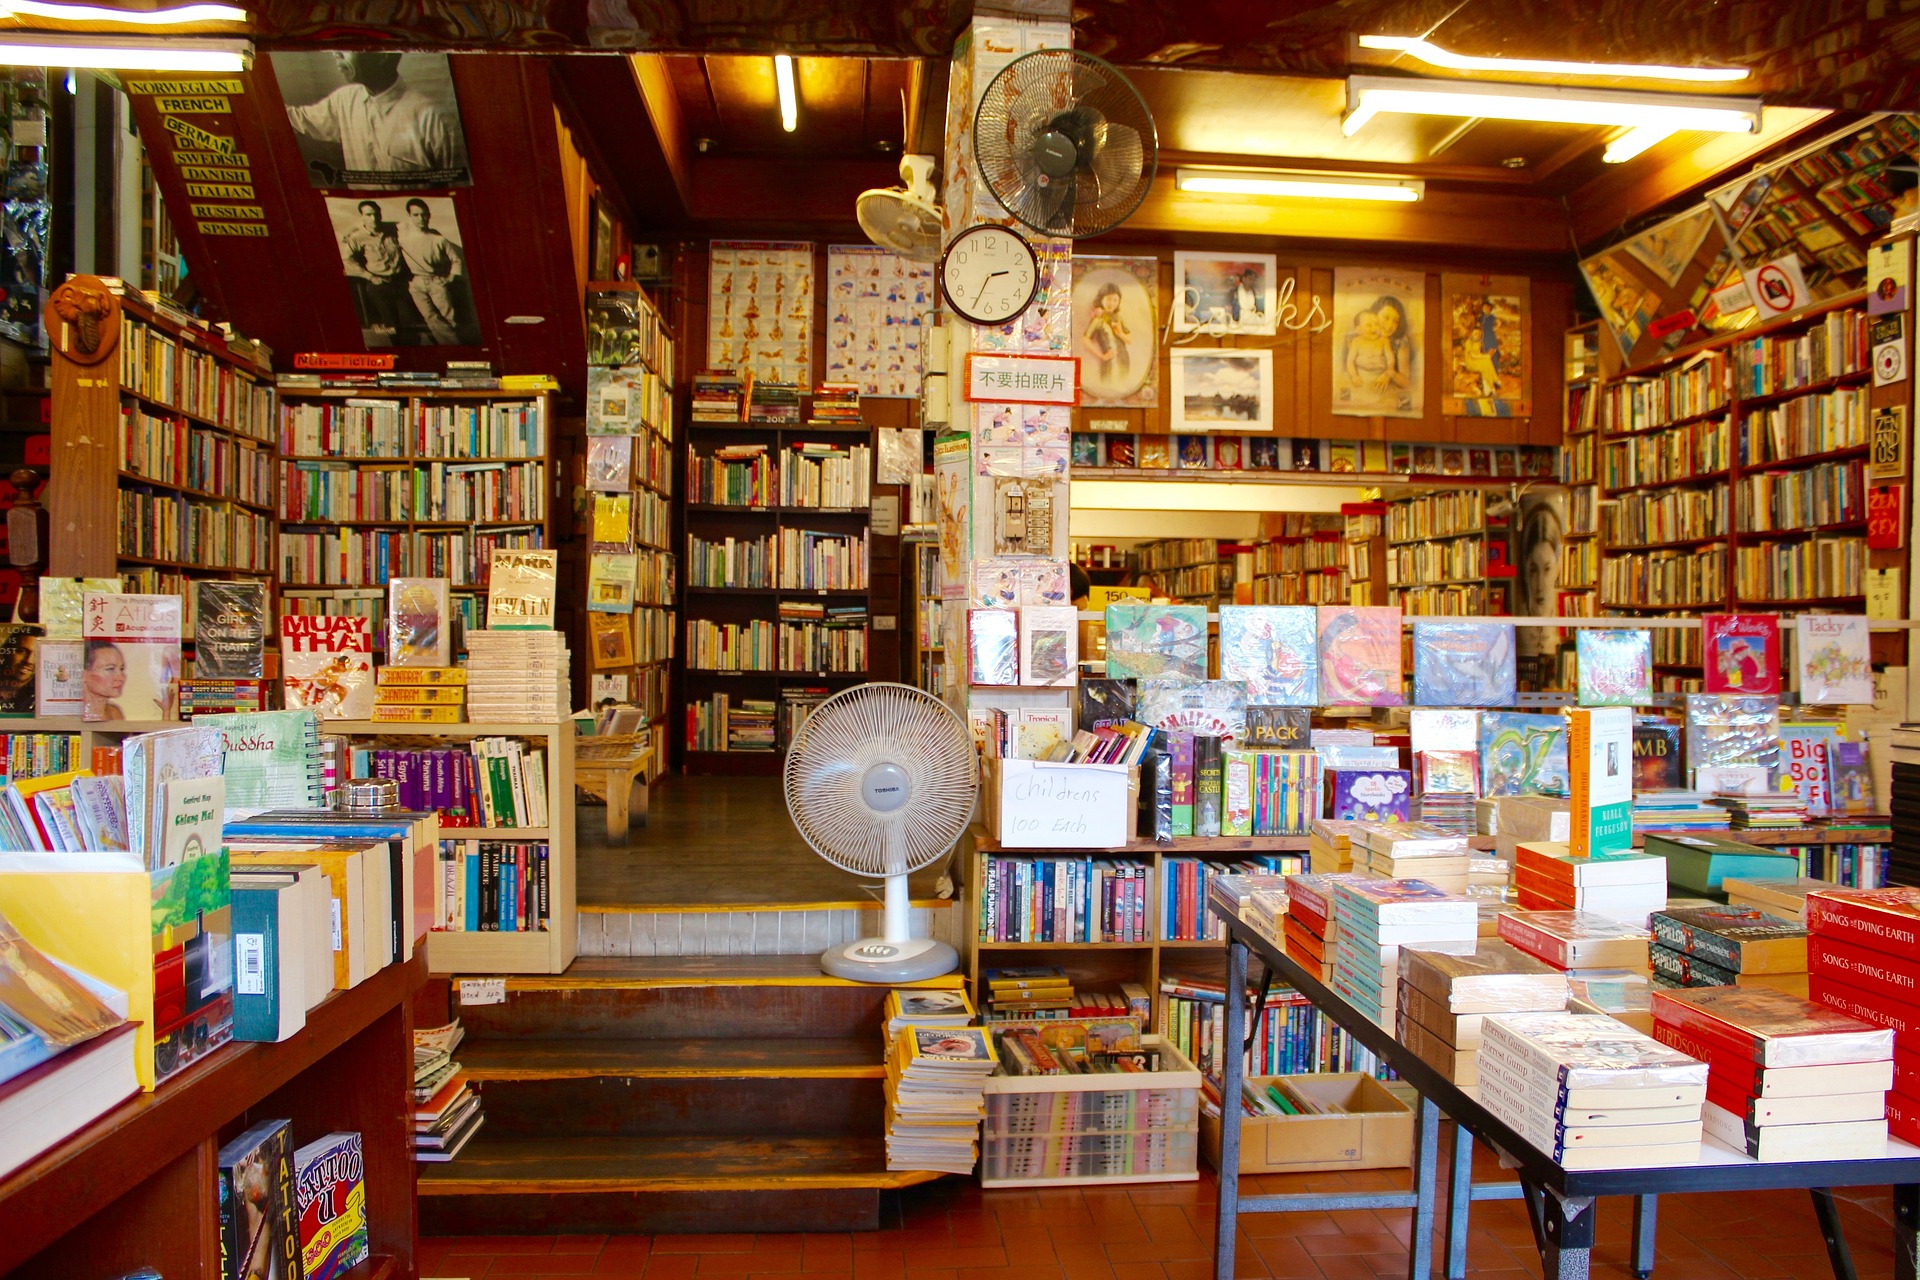 Book store with books on tables and shelves, wall-to-wall throughout the room.